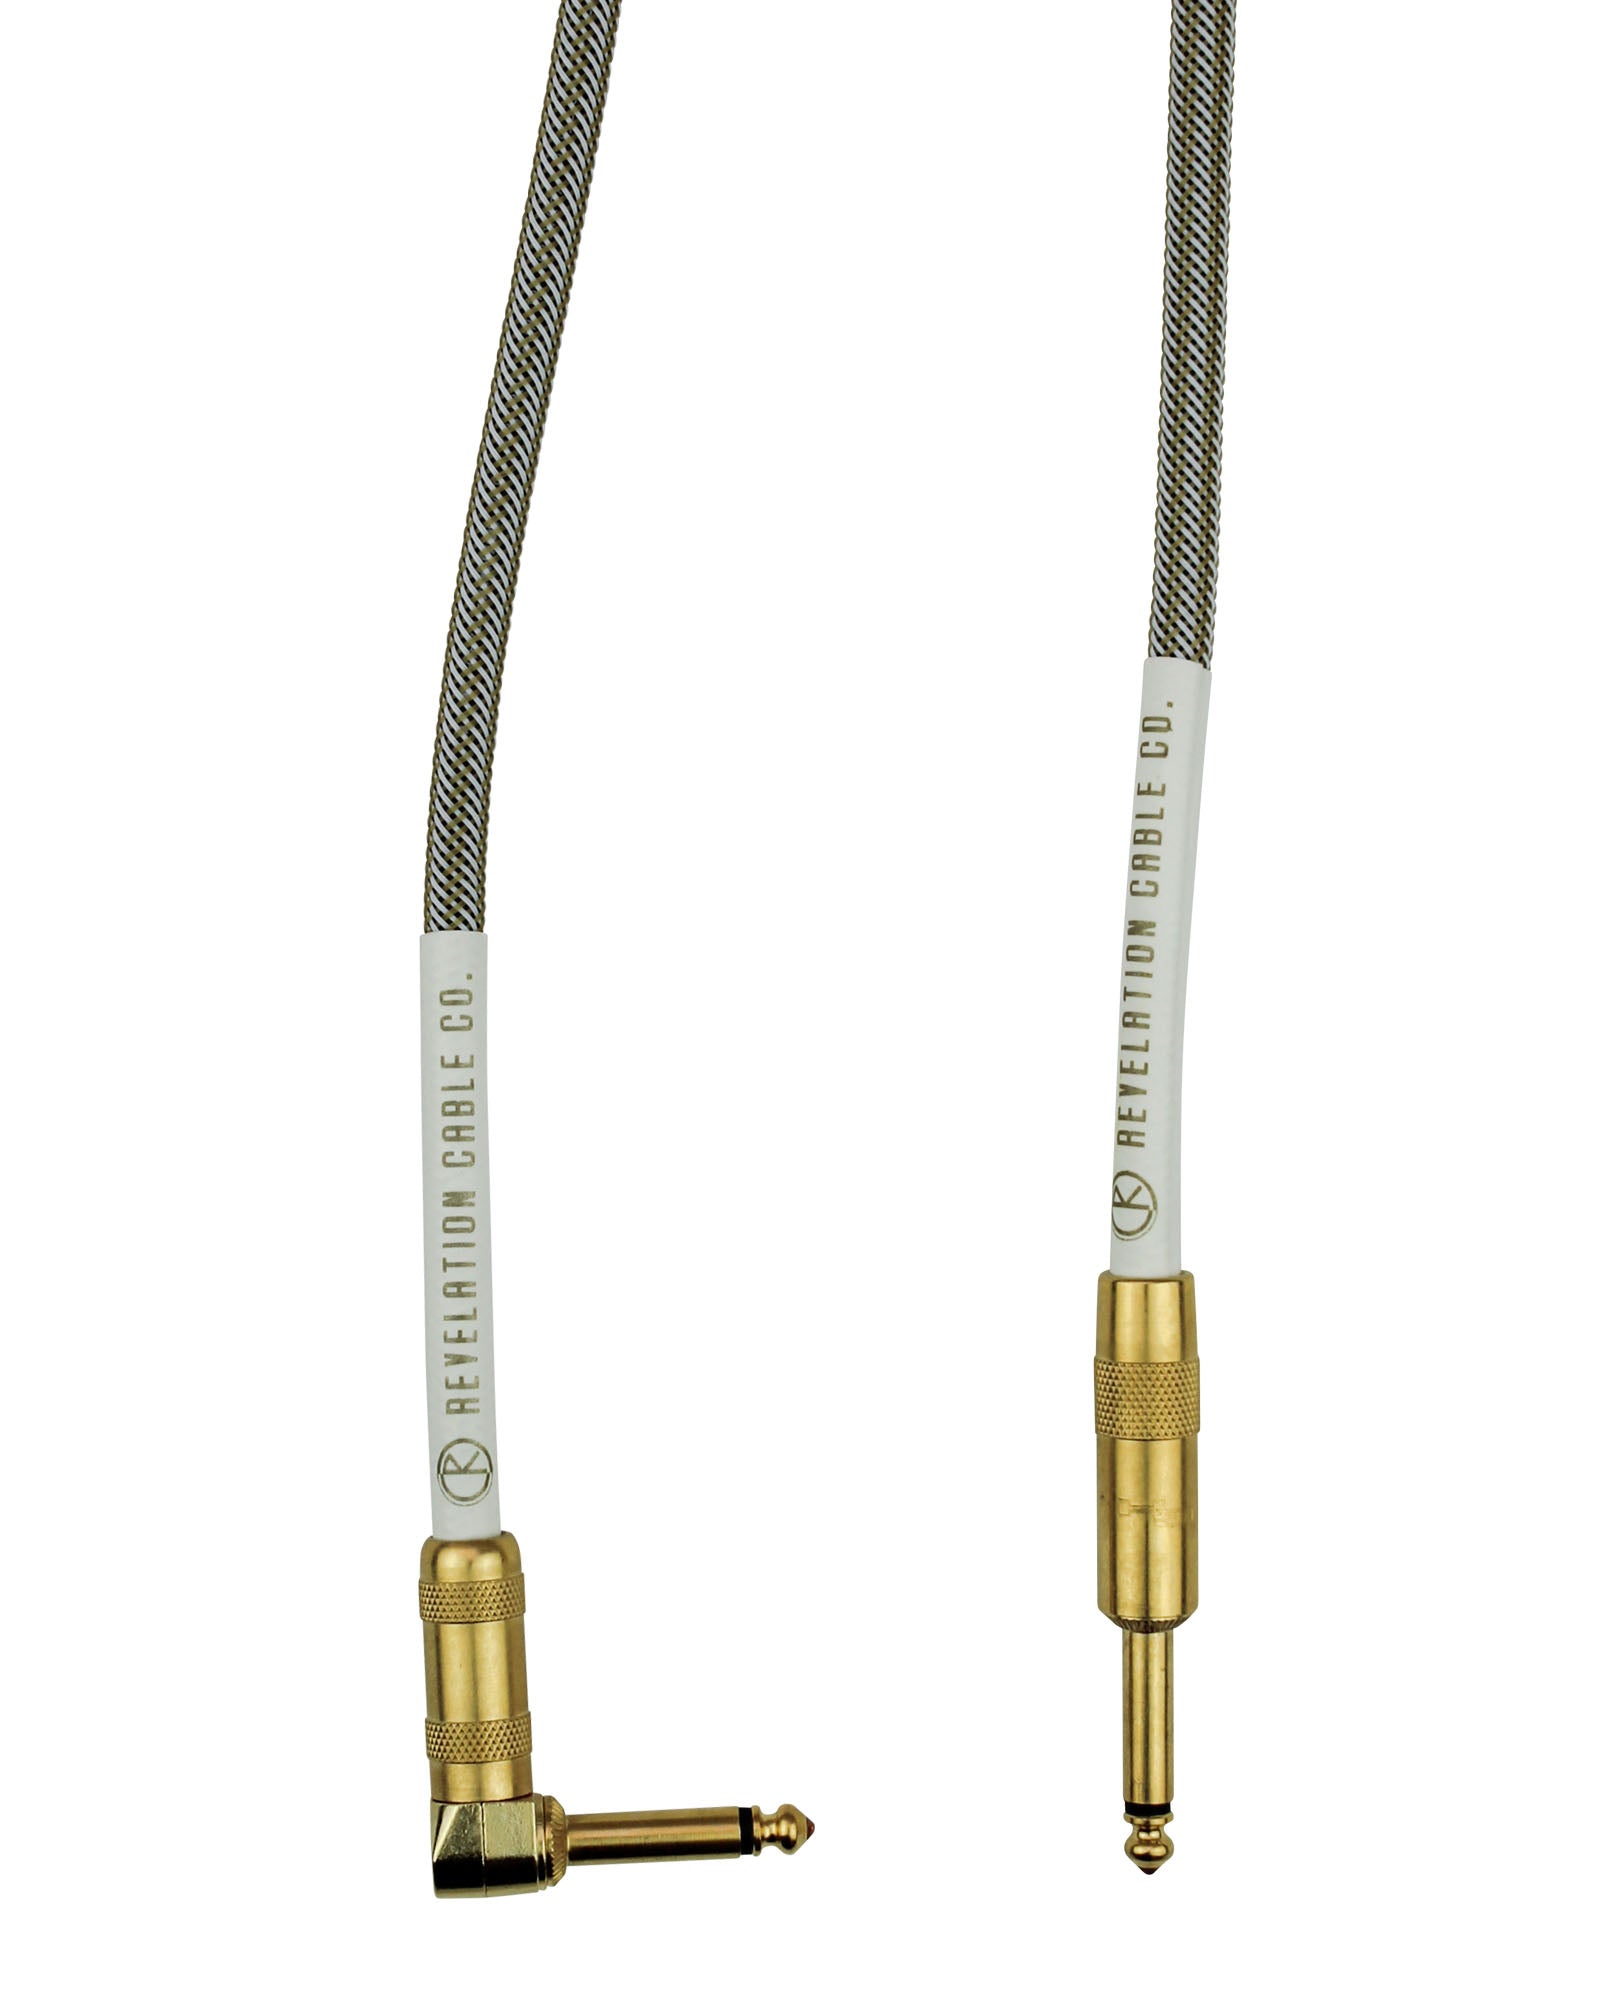 Revelation Cable Co. White Gold Tweed 10' Premium Instrument Cable